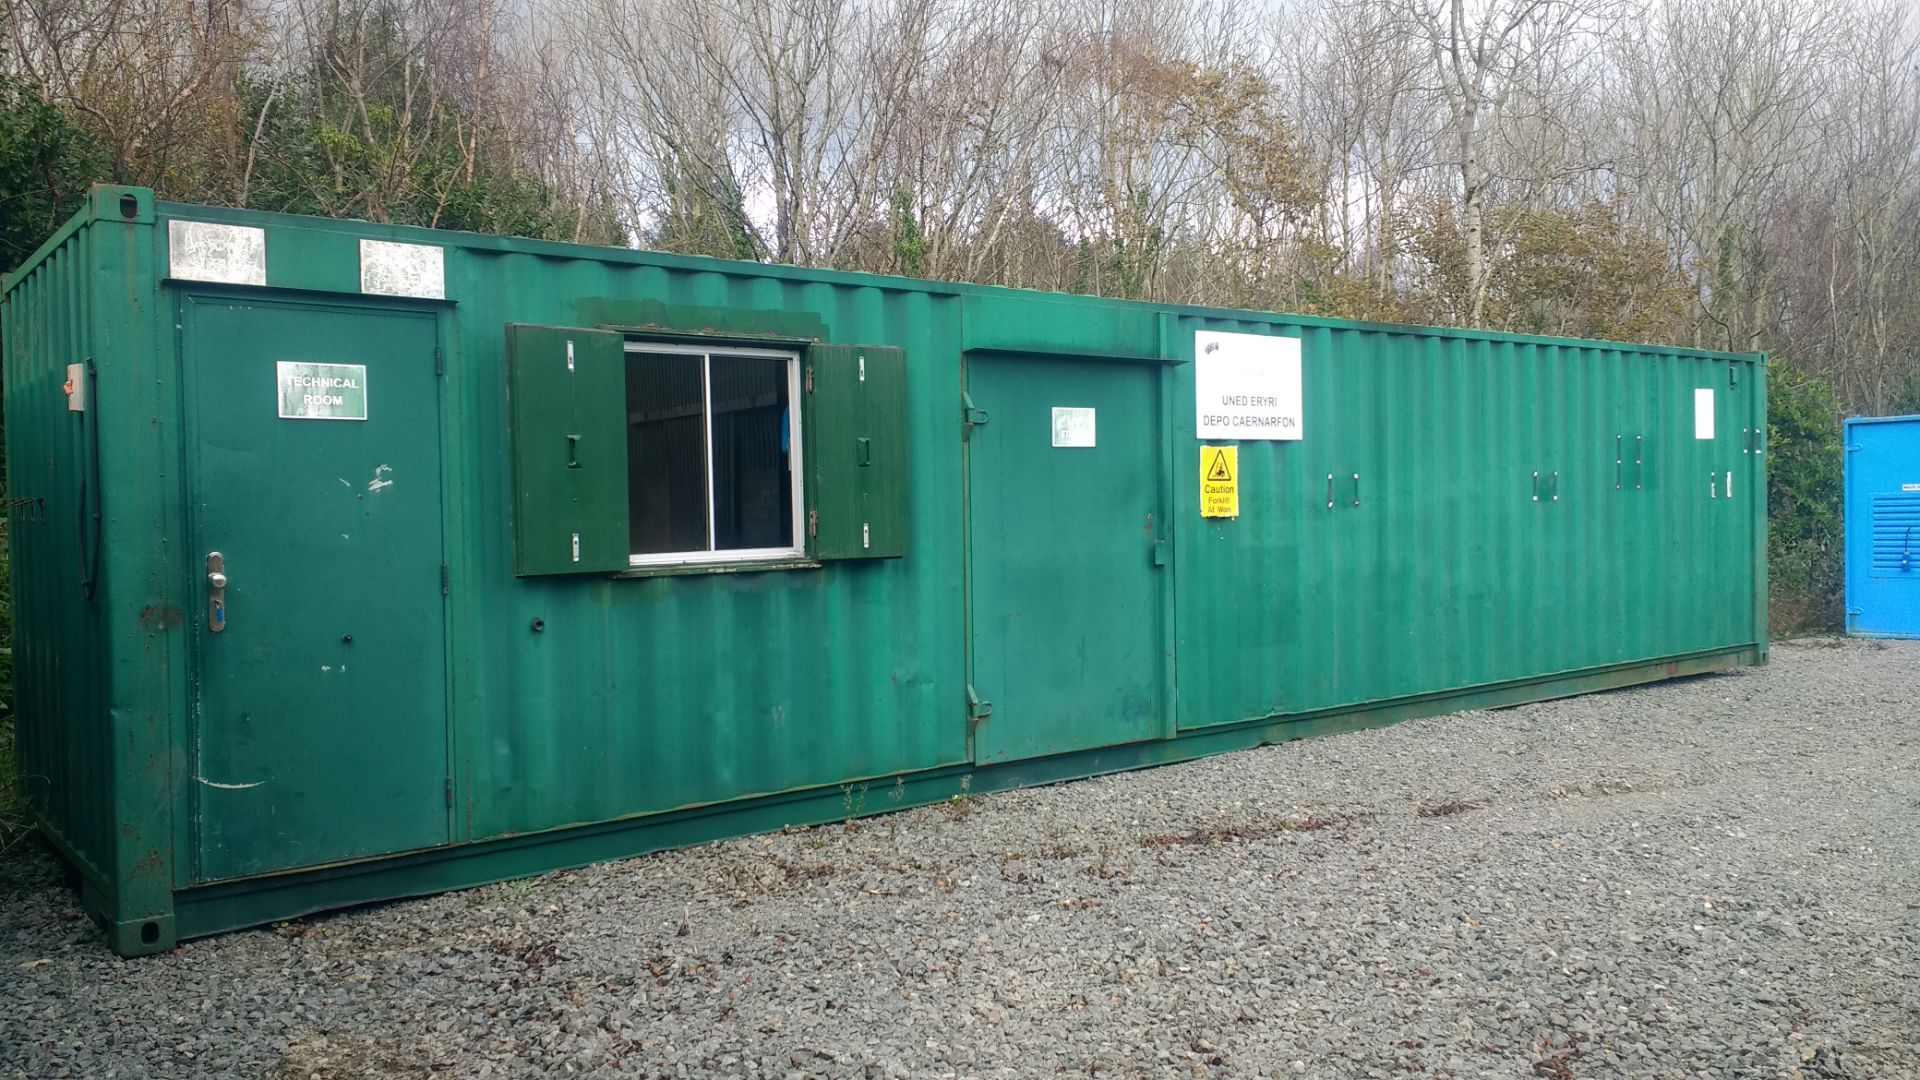 40 x 8 Storage / Office Container 12ft Office 28ft Stores Very Good Condition Double End Doors and